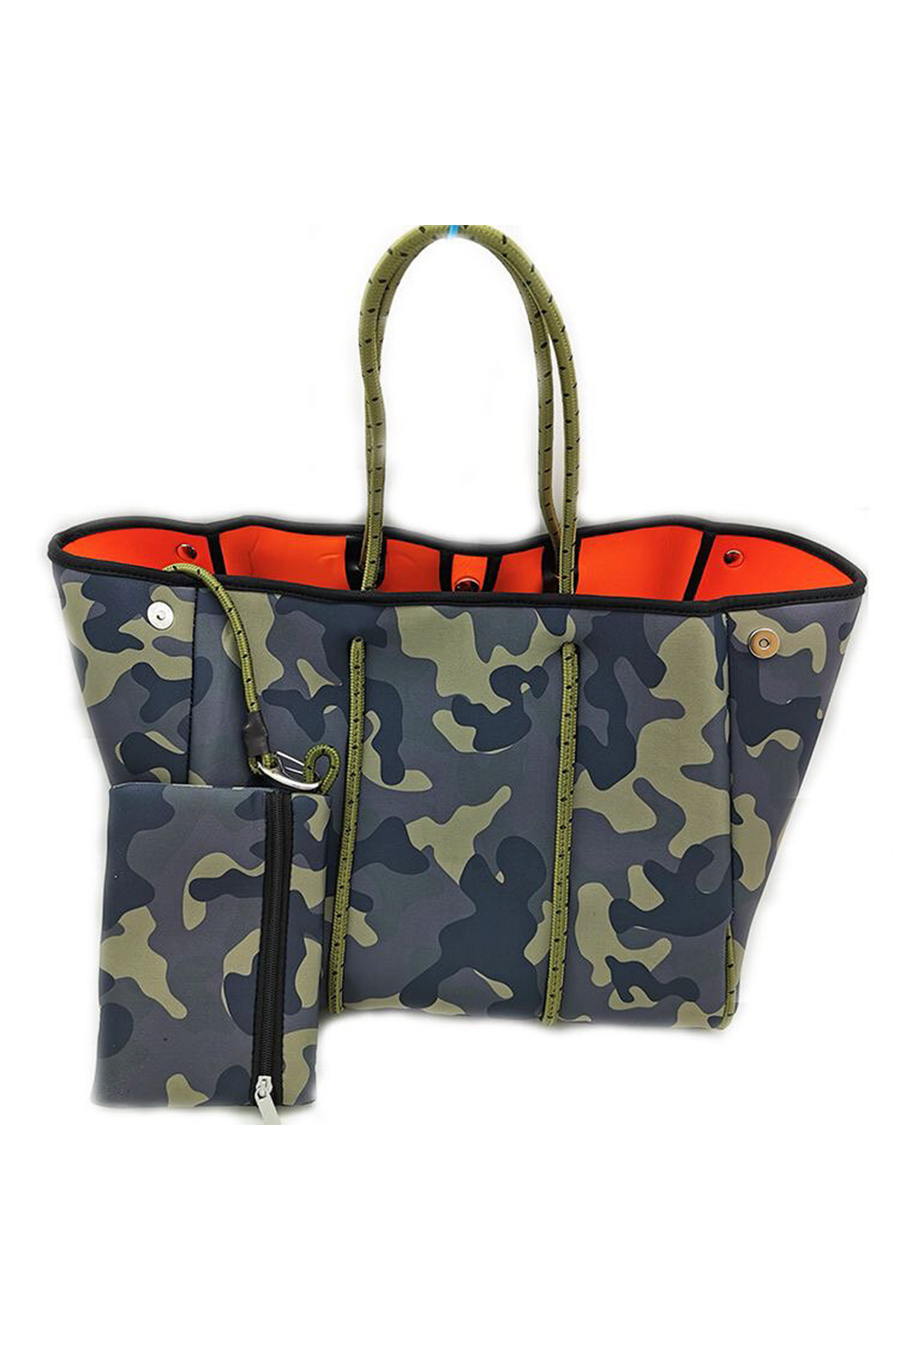 Neoprene Tote | Solid Camo - Main Image Number 2 of 2